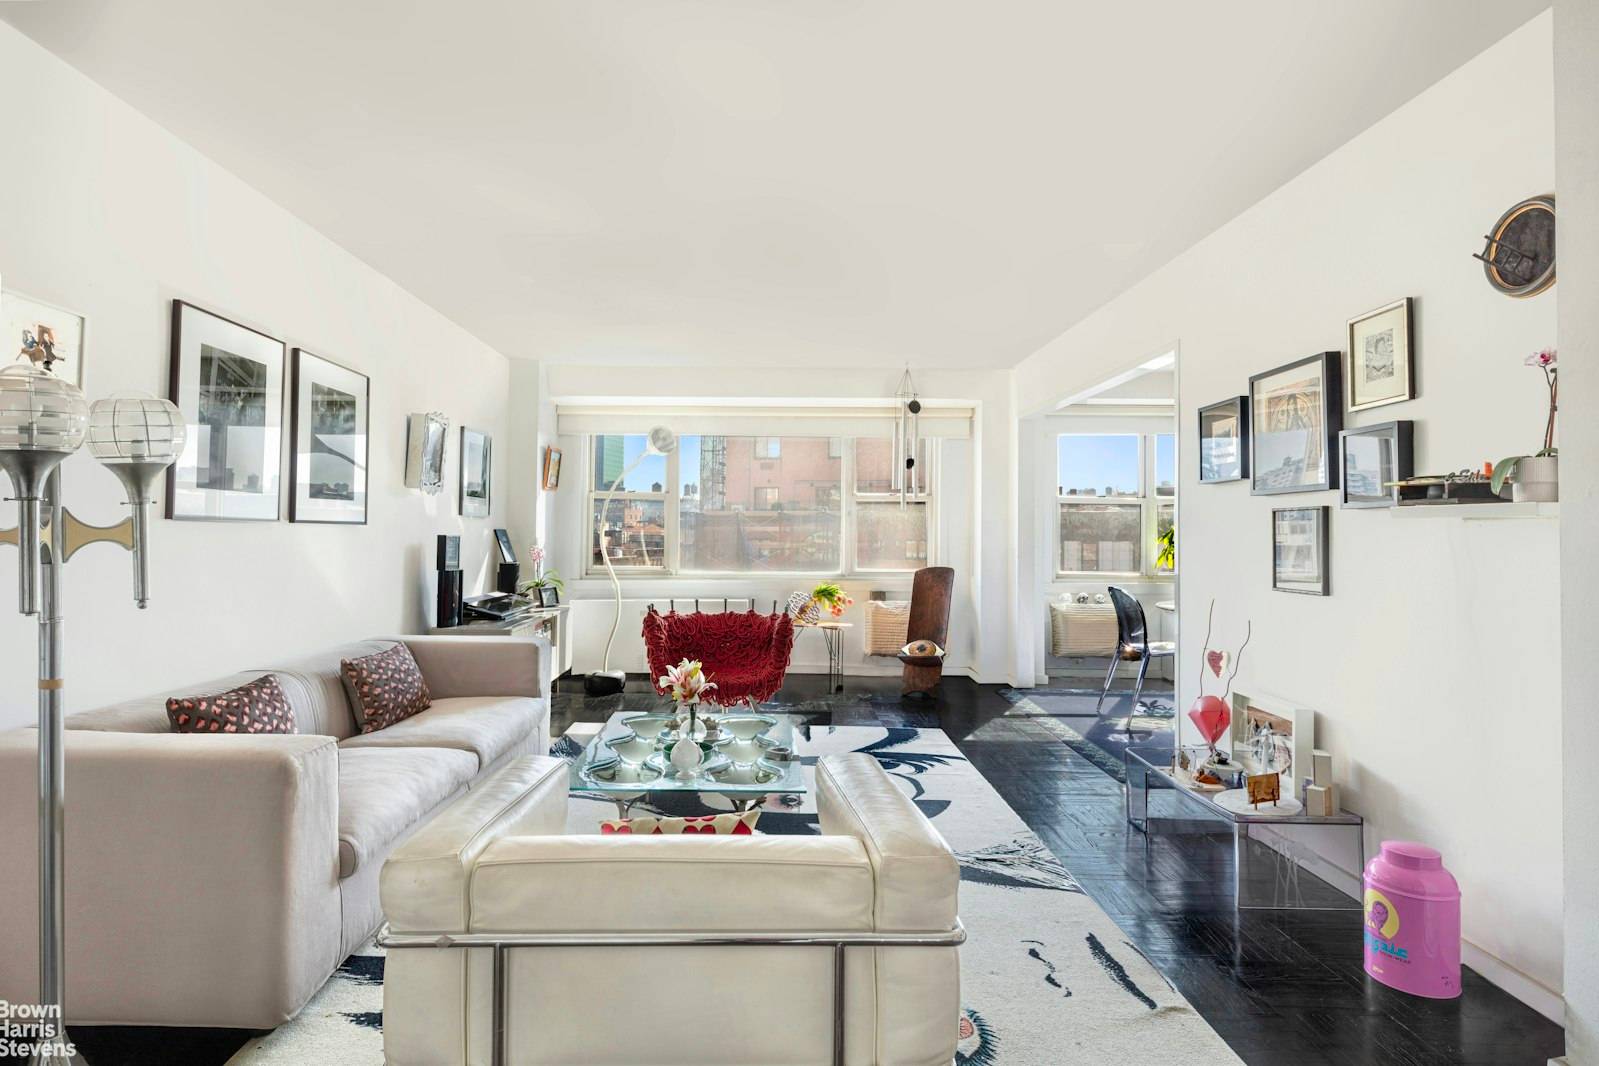 Beauty, space and spectacular natural light are found throughout this large one bedroom convertible to 2 apartment in the mid century Charlton House, Hudson Square's premiere co op.